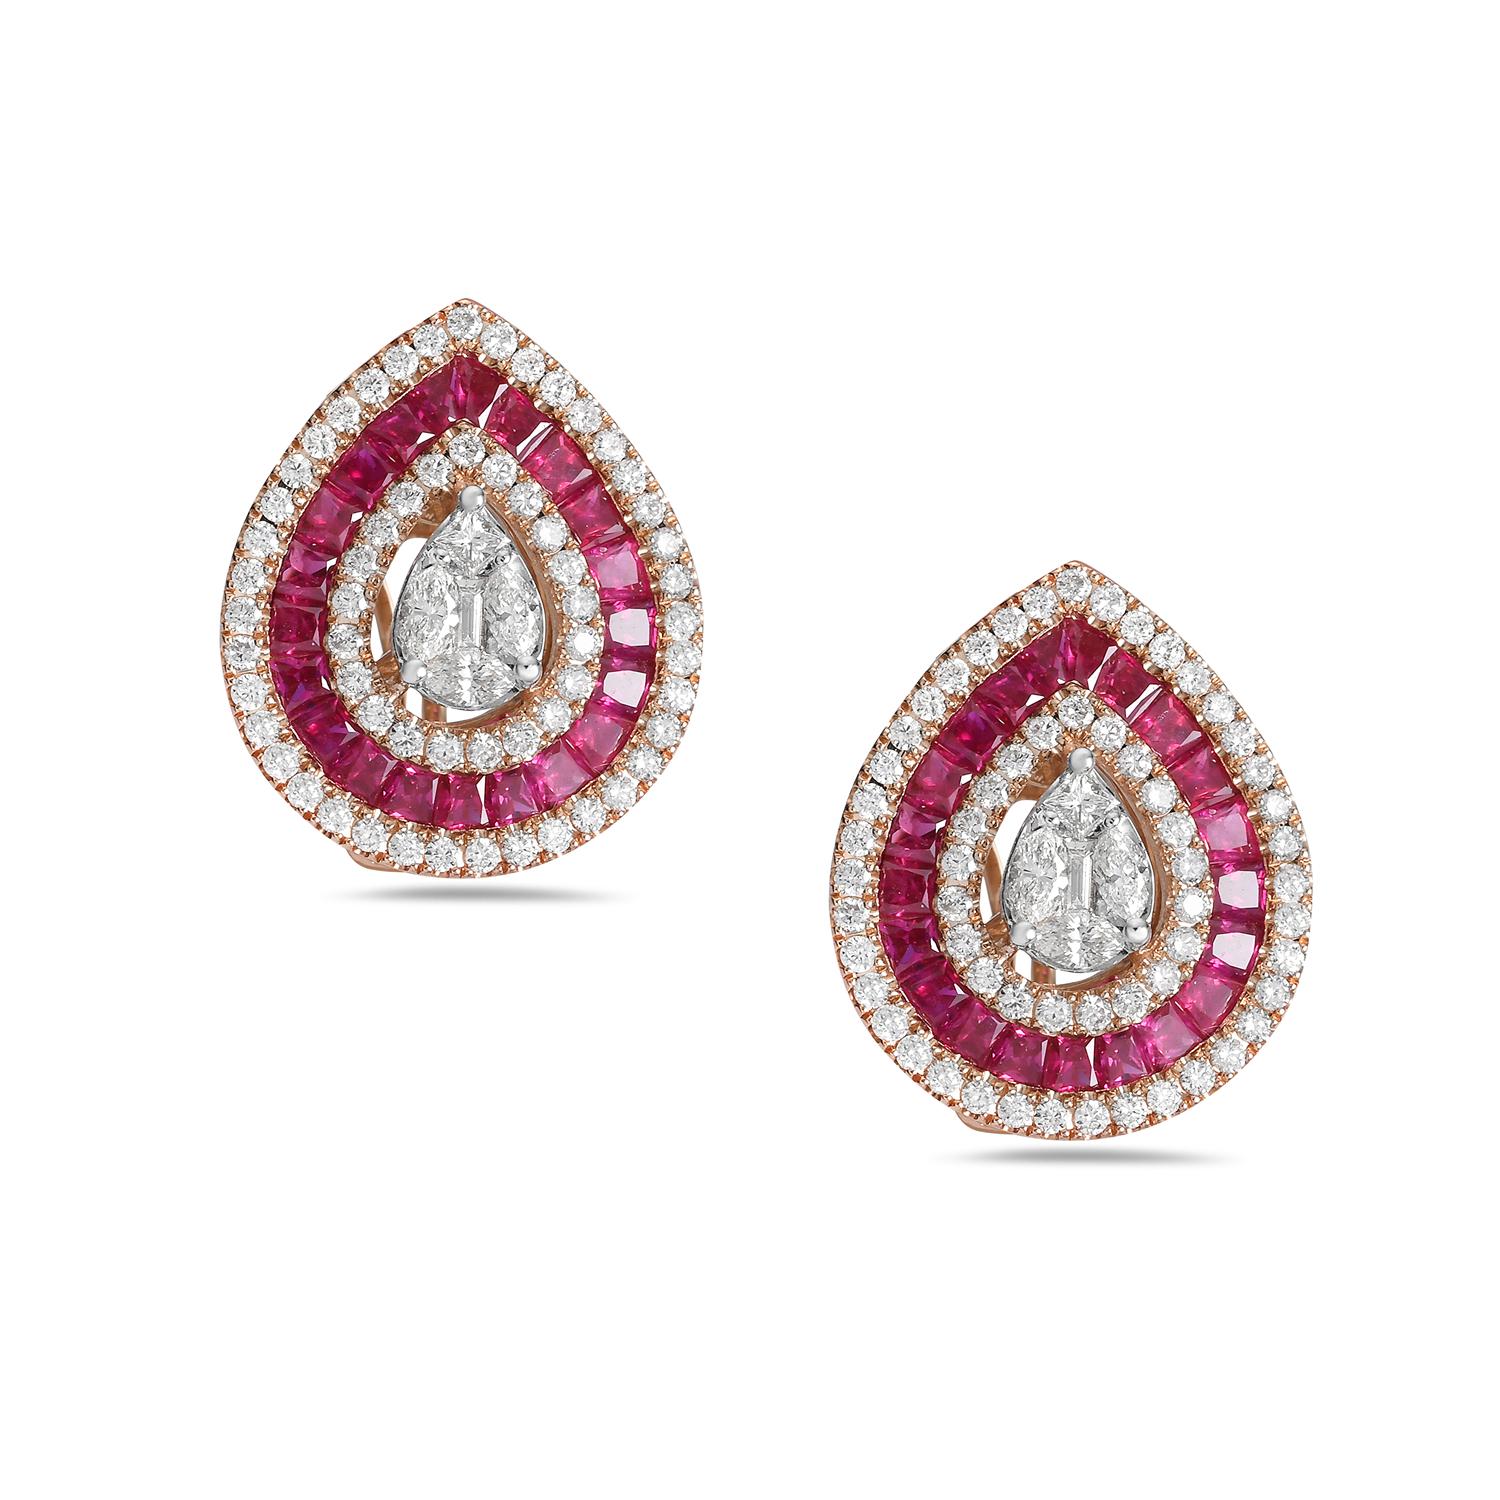 Mixed Cut 2.37 Ct Ruby Pear Shaped Studs With Diamonds Made In 18k Gold For Sale